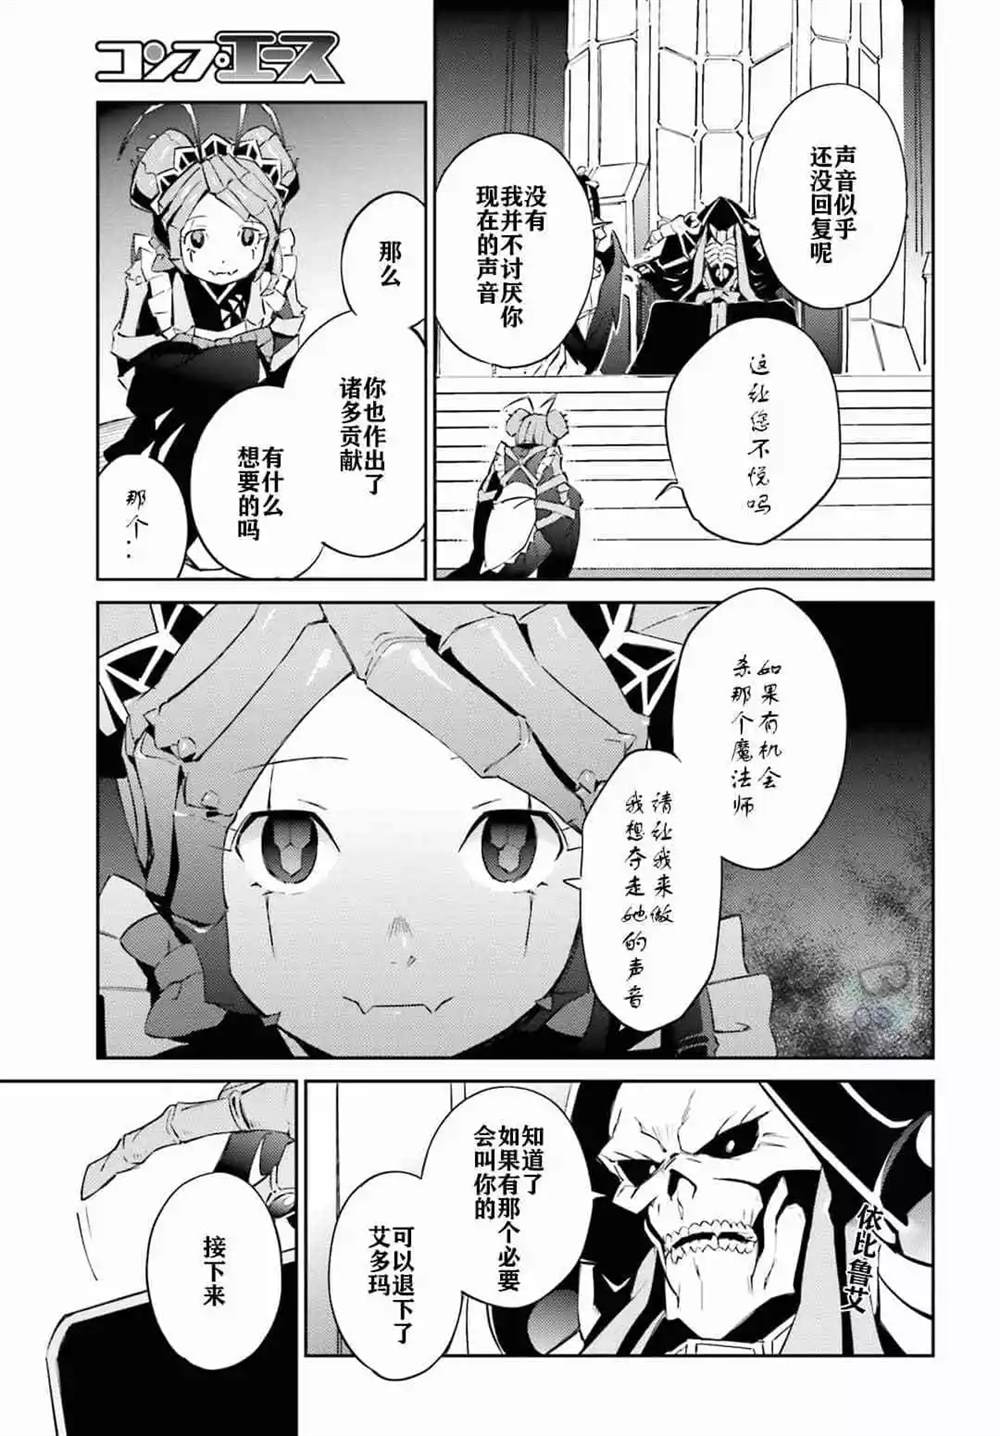 OVERLORD - 第53话 - 5